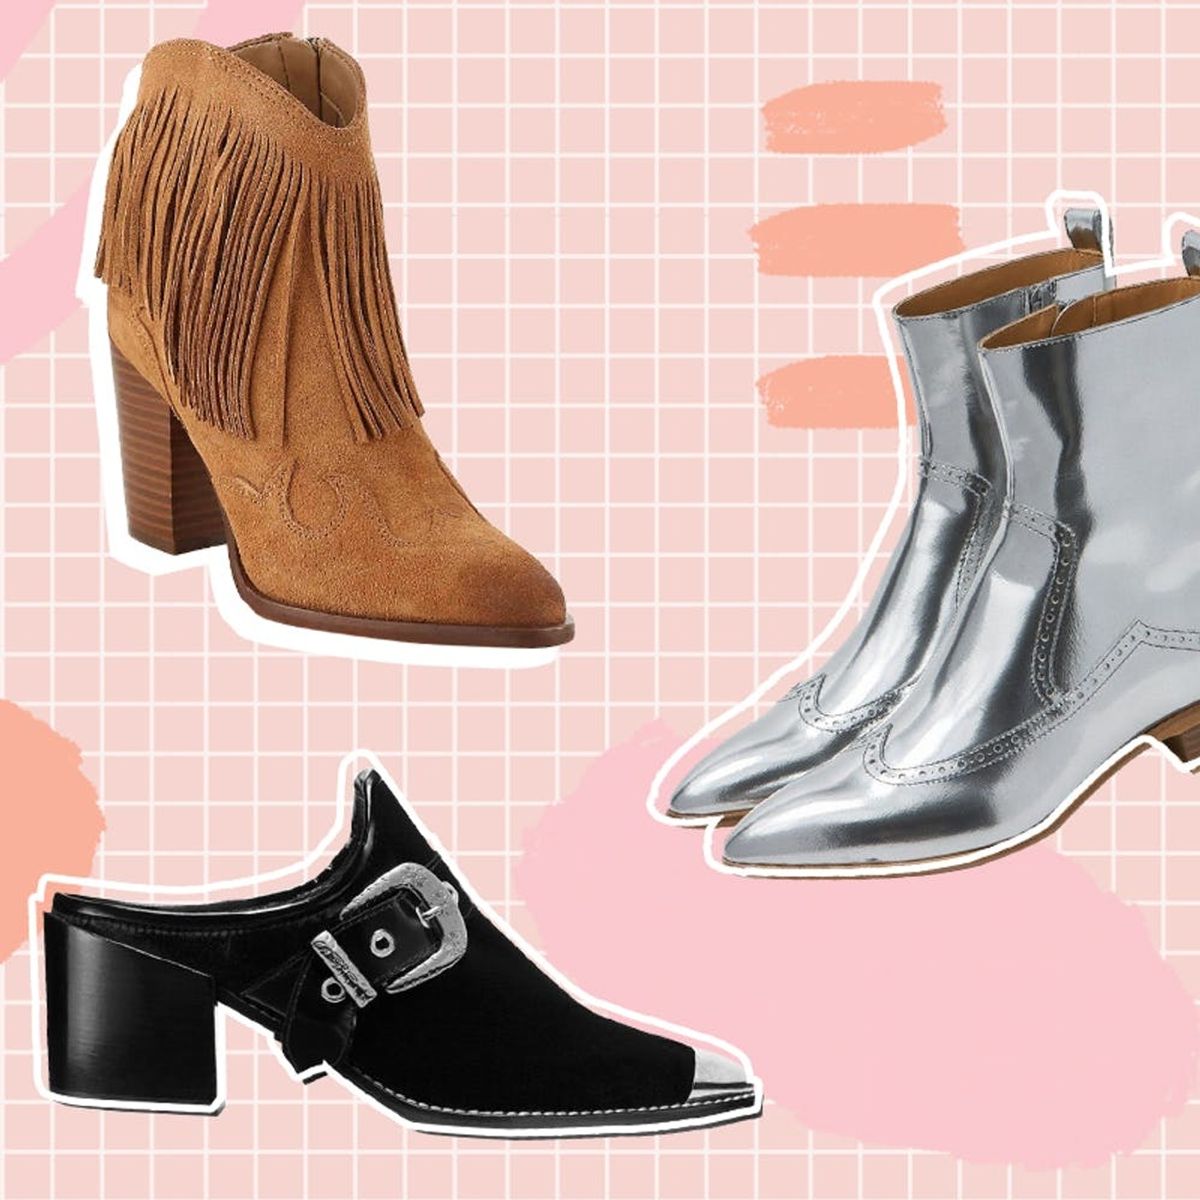 15 Reasons Why You’re Gonna Want a Pair of Western Style Boots